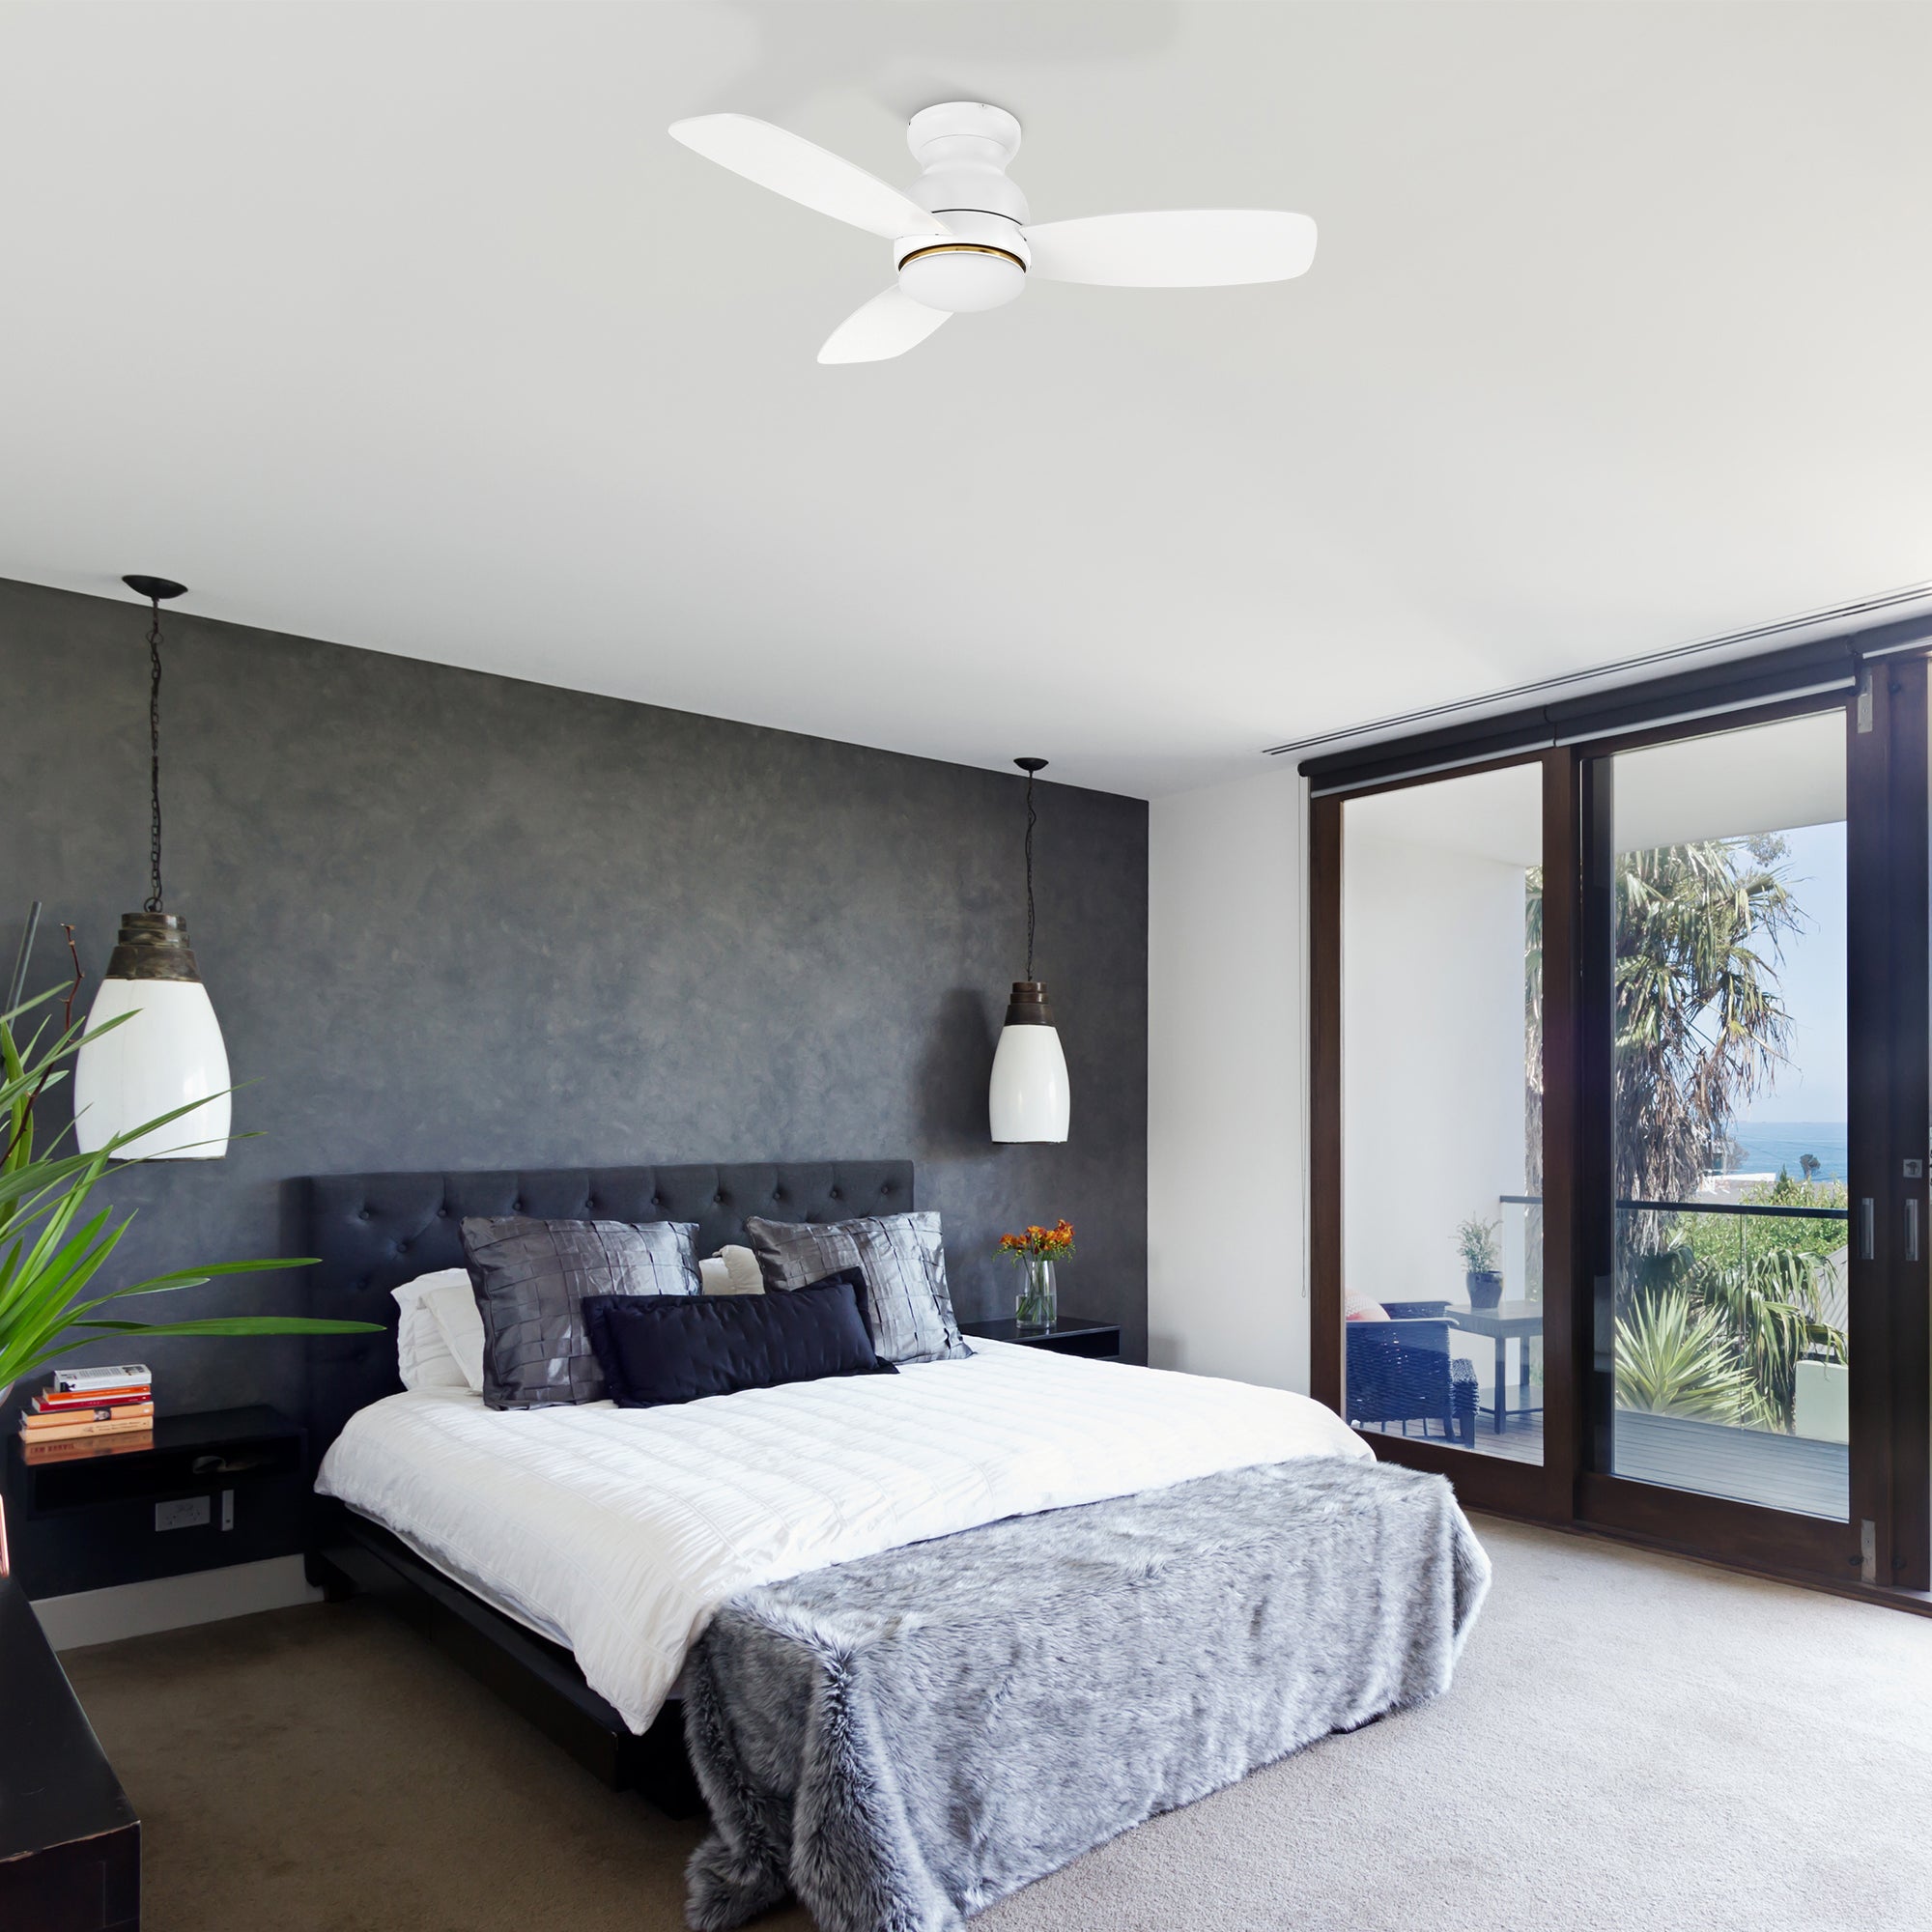 Create the home environment of your dreams with the versatile and powerful Arran 44 /48 /60 inches modern ceiling fan with lights! On the inside, The remote control ceiling fan features advanced motor and lighting technology for energy efficiency and precise control. On the outside, the Arran low profile ceiling fan features a sleek silhouette, elegant blades, and a timeless black or white finish for the ideal fit in any home interior! #color_white&light-wood